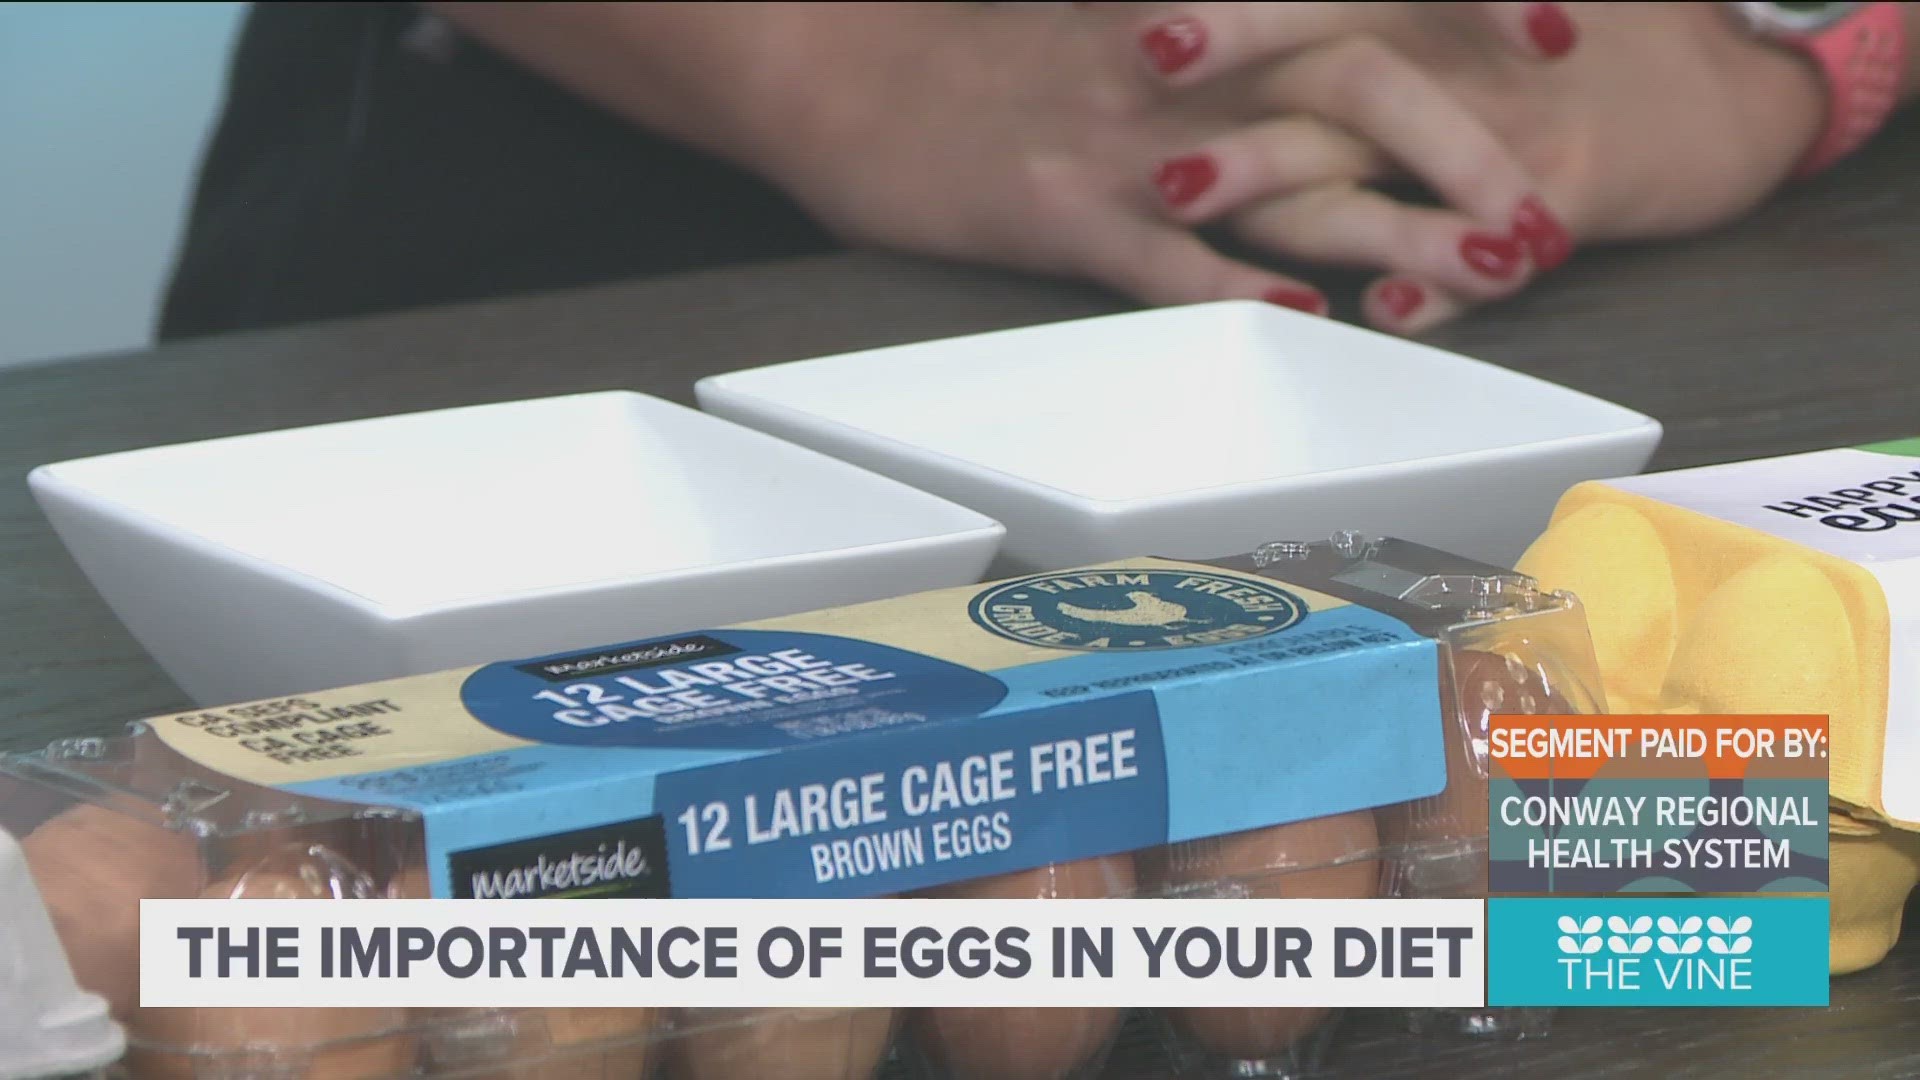 Jolie Jackson, a registered dietitian, tells us all about eggs and why they are important to have in your diet.